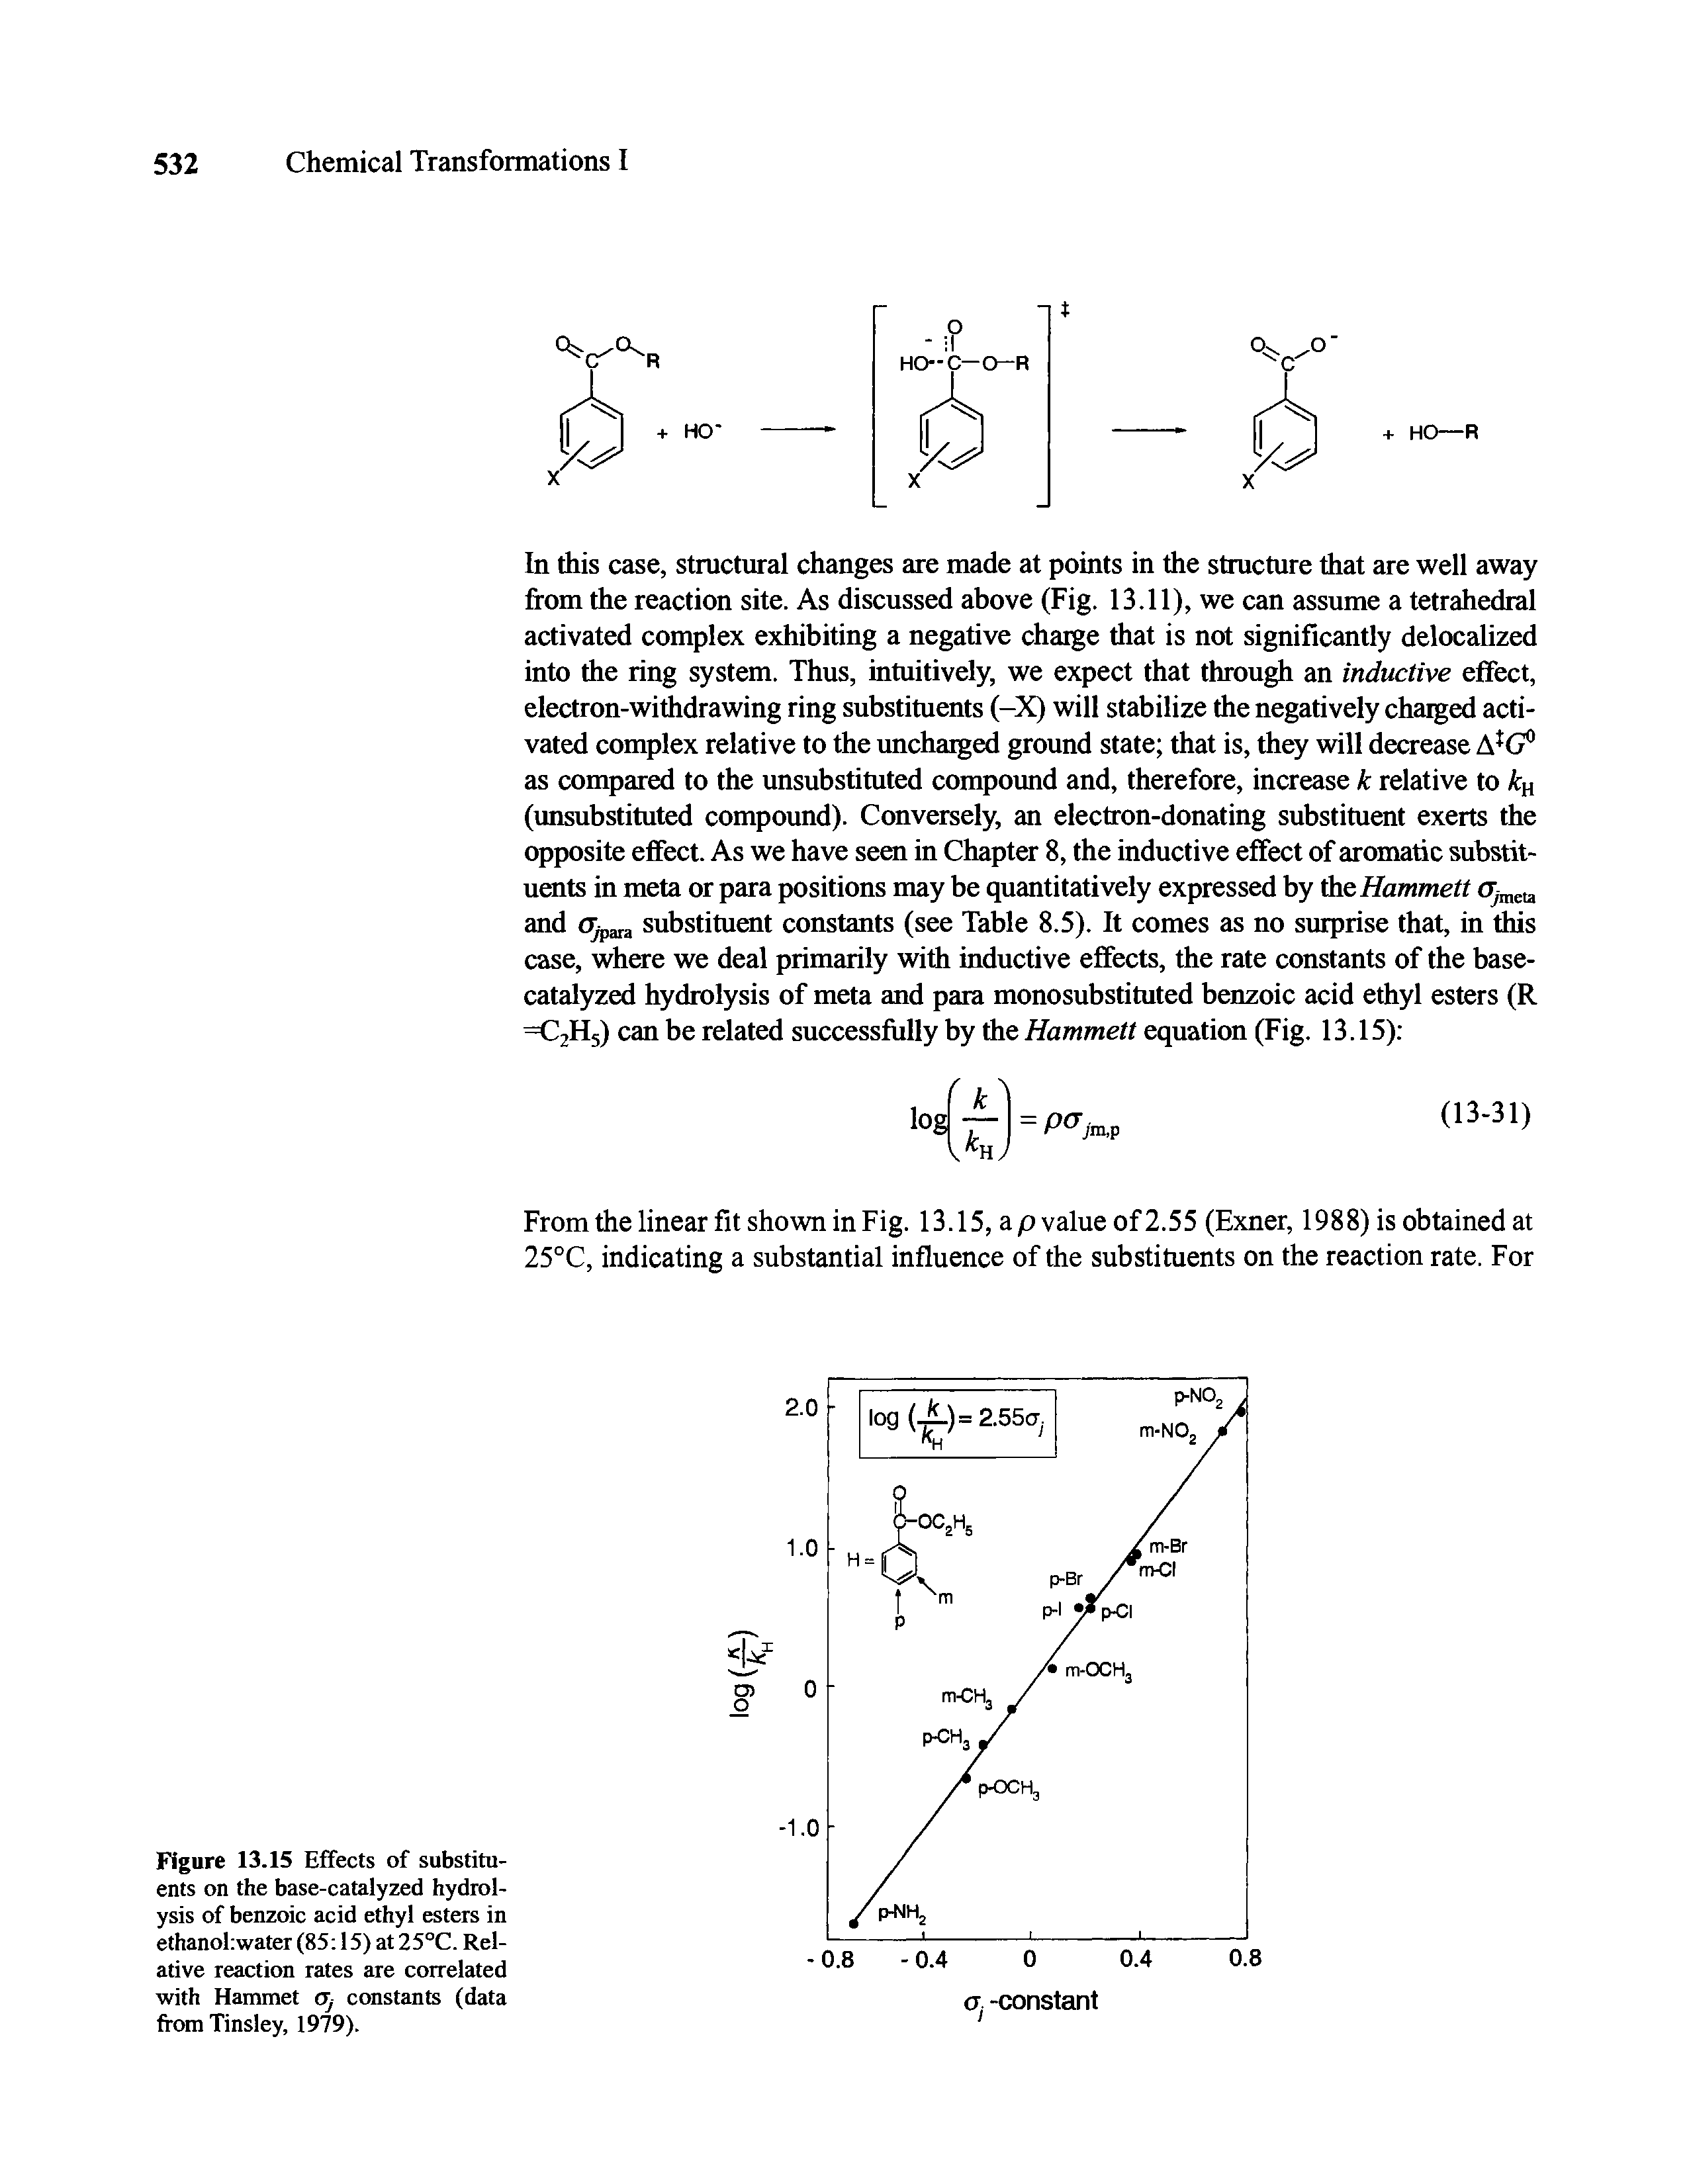 Figure 13.15 Effects of substituents on the base-catalyzed hydrolysis of benzoic acid ethyl esters in ethanoliwater (85 15) at 25°C. Relative reaction rates are correlated with Hammet Oj constants (data from Tinsley, 1979).